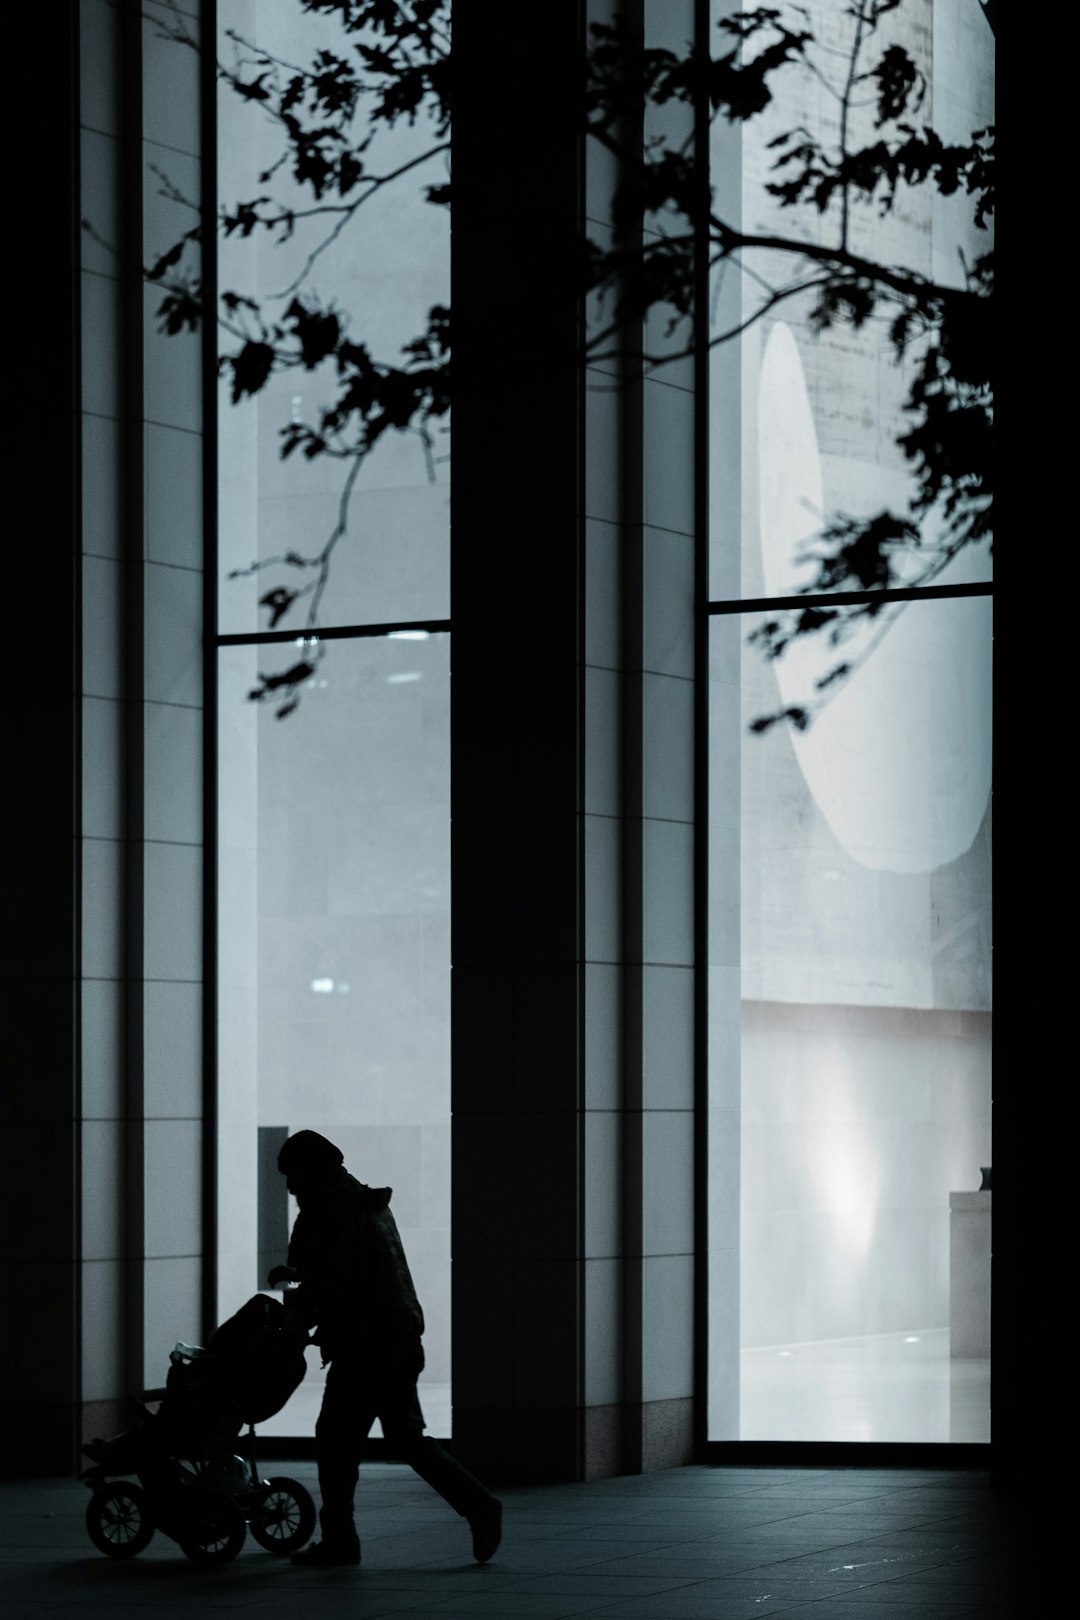 silhouette of person standing near glass window